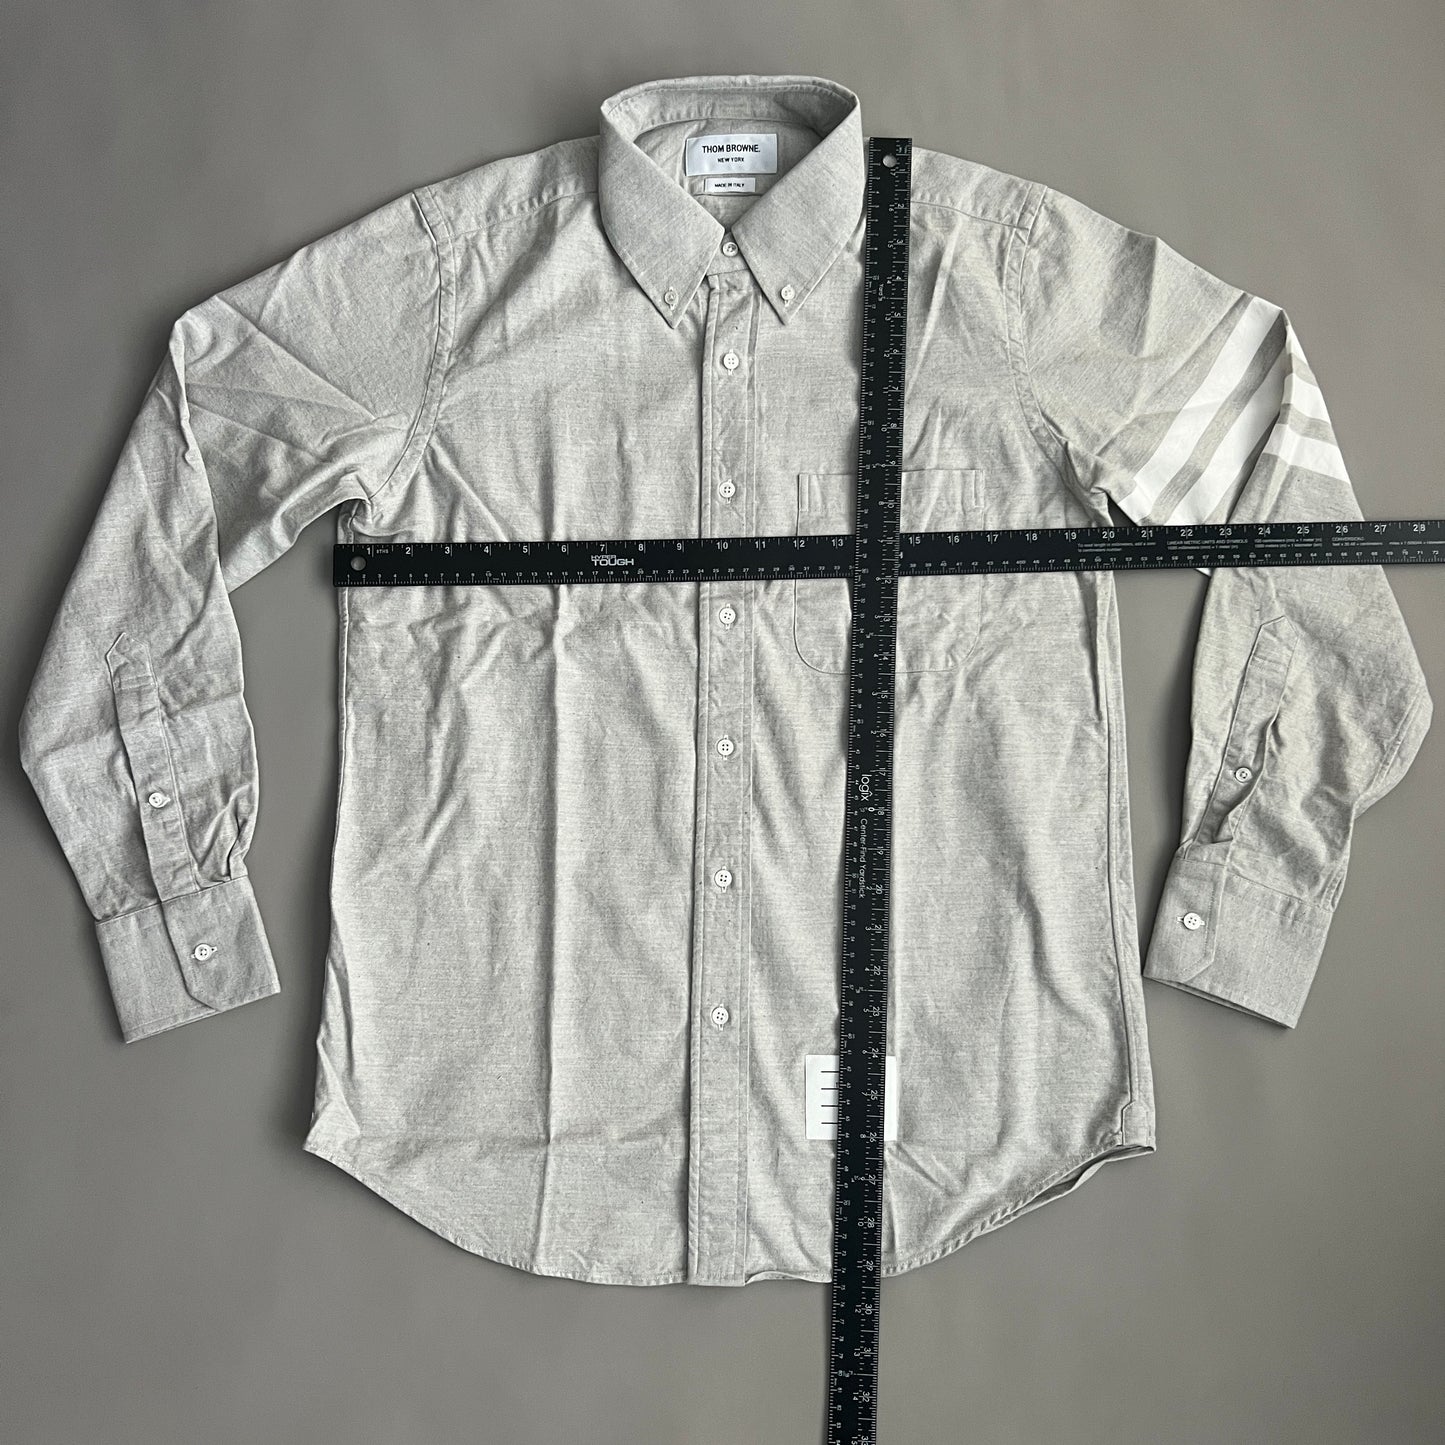 THOM BROWNE Straight Fit Button-Down Long Sleeve w/CB RWB Flannel shirt w/woven 4 Bar Sleeve in Med Grey Size 2 (NEW)